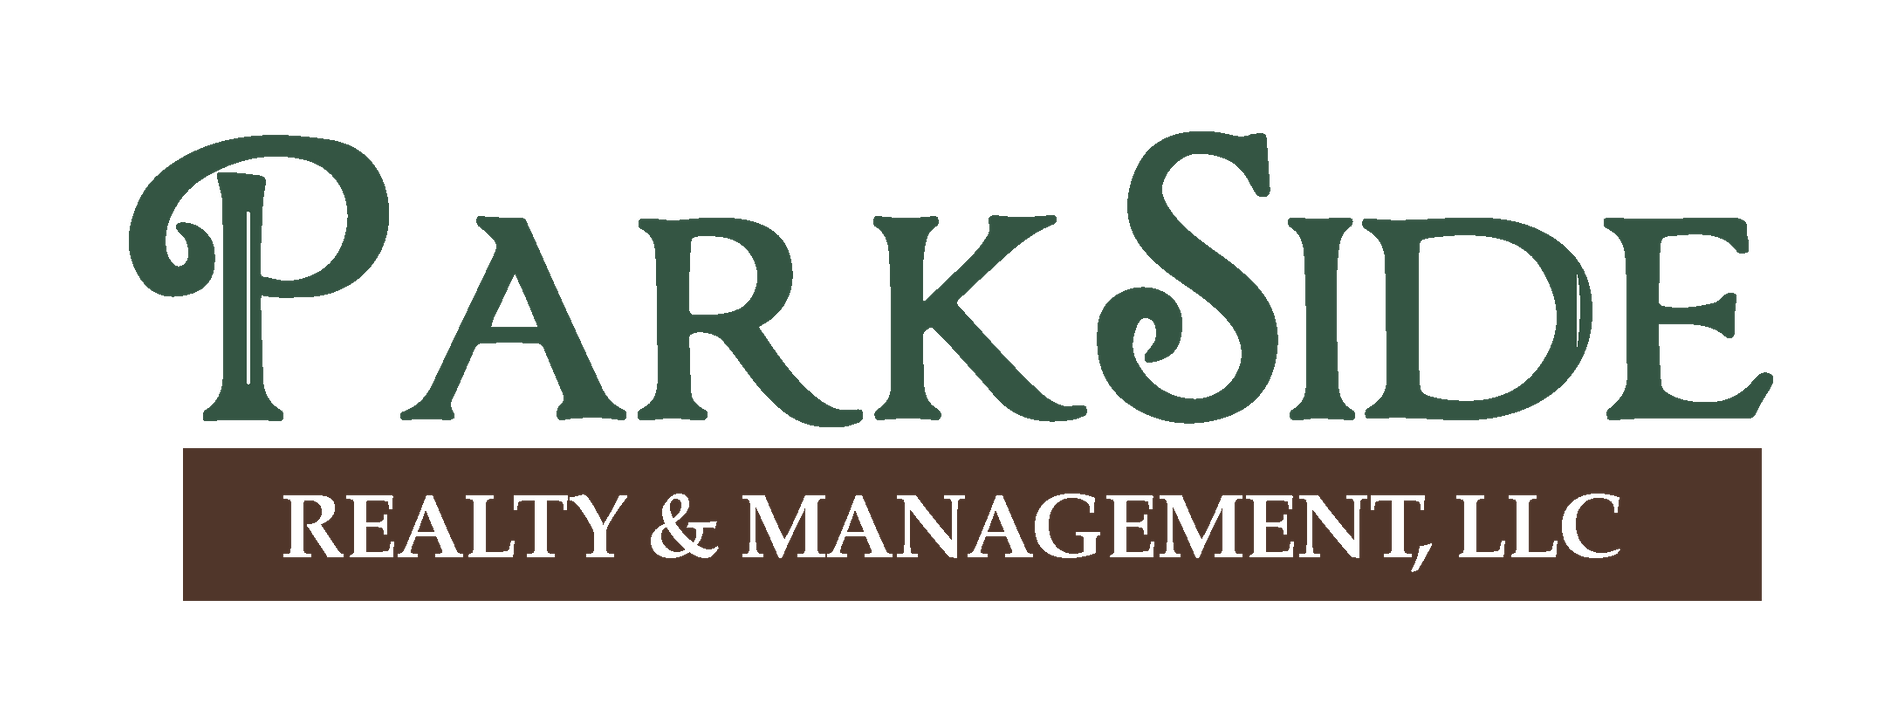 ParkSide Realty & Management, LLC Logo - Click to go to home page